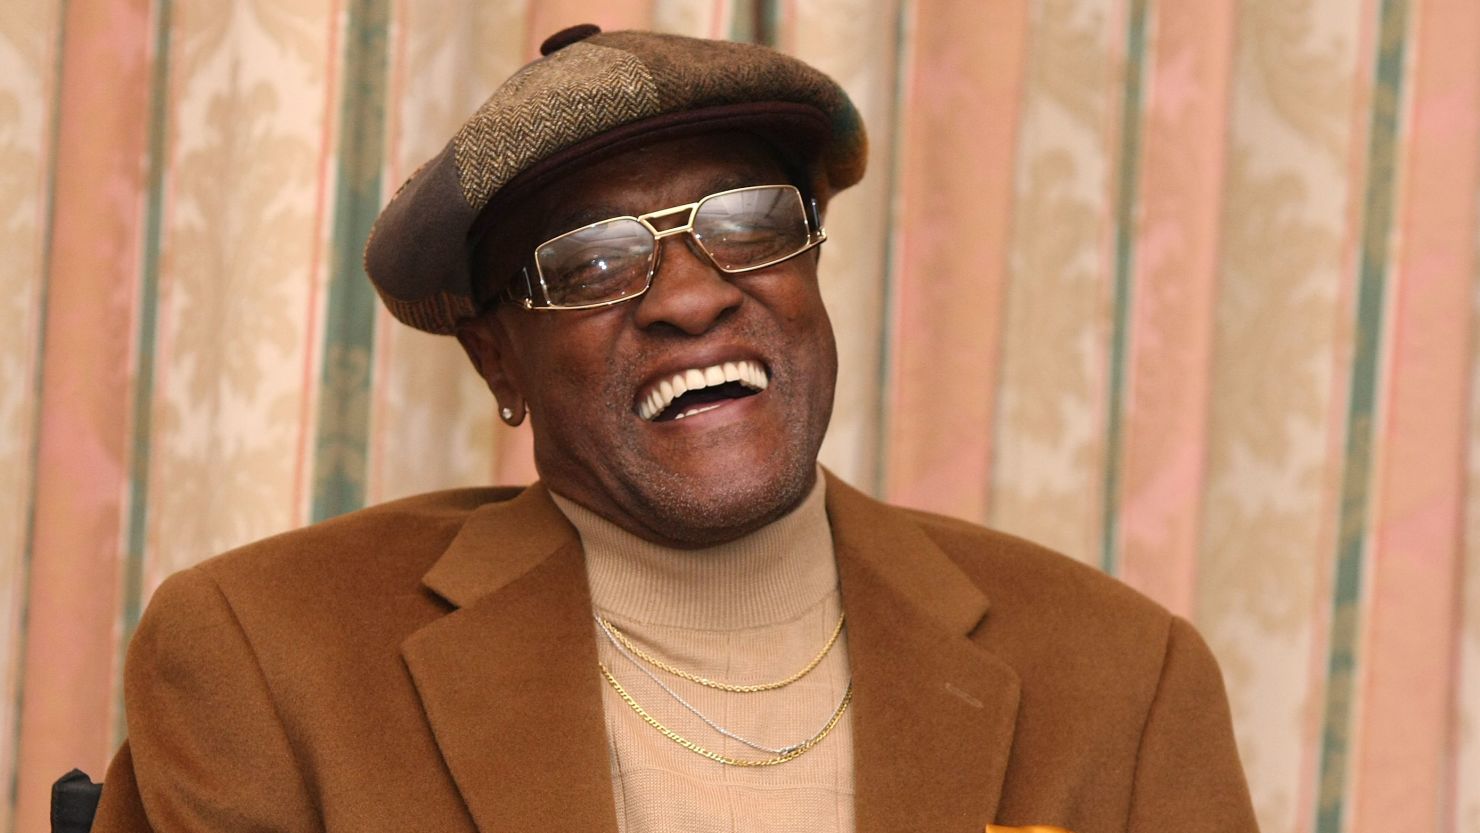 Billy Paul speaks at the Pre-Grammy Party at the Four Seasons Hotel in Beverly Hills, California in 2008.